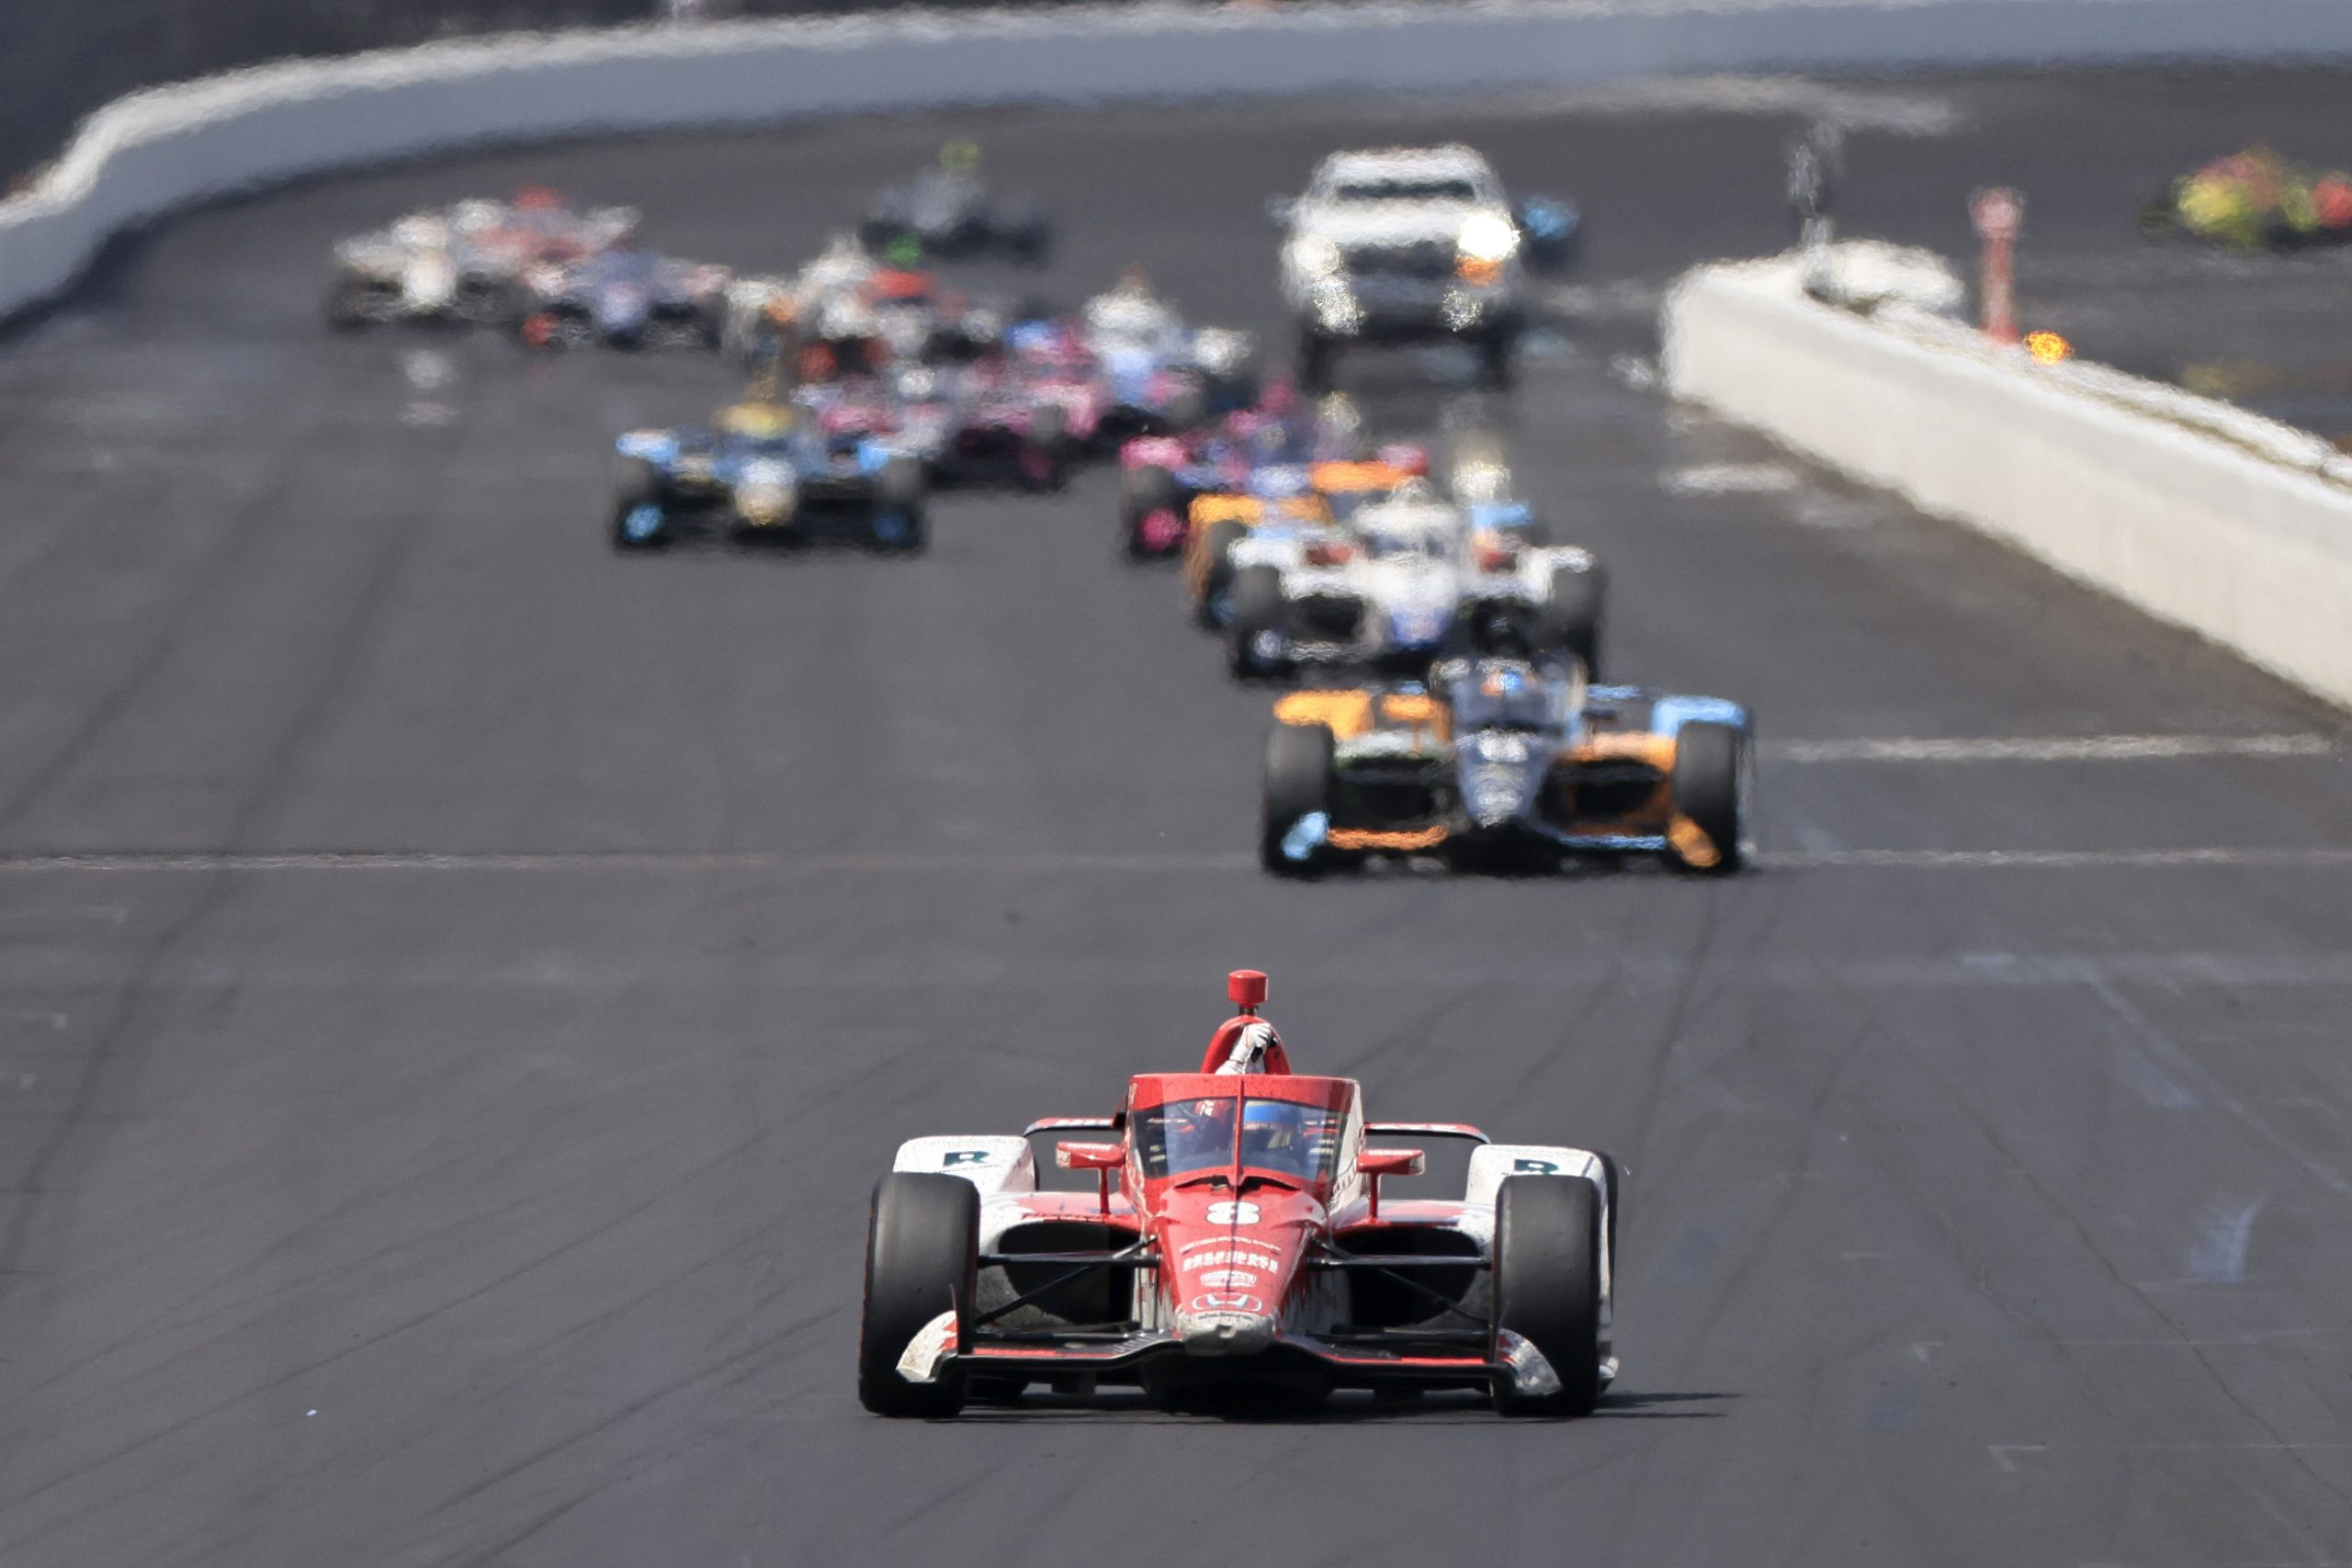 Marcus Ericsson won the 2022 Indianapolis 500 for Chip Ganassi Racing and pocketed $4.5 million.